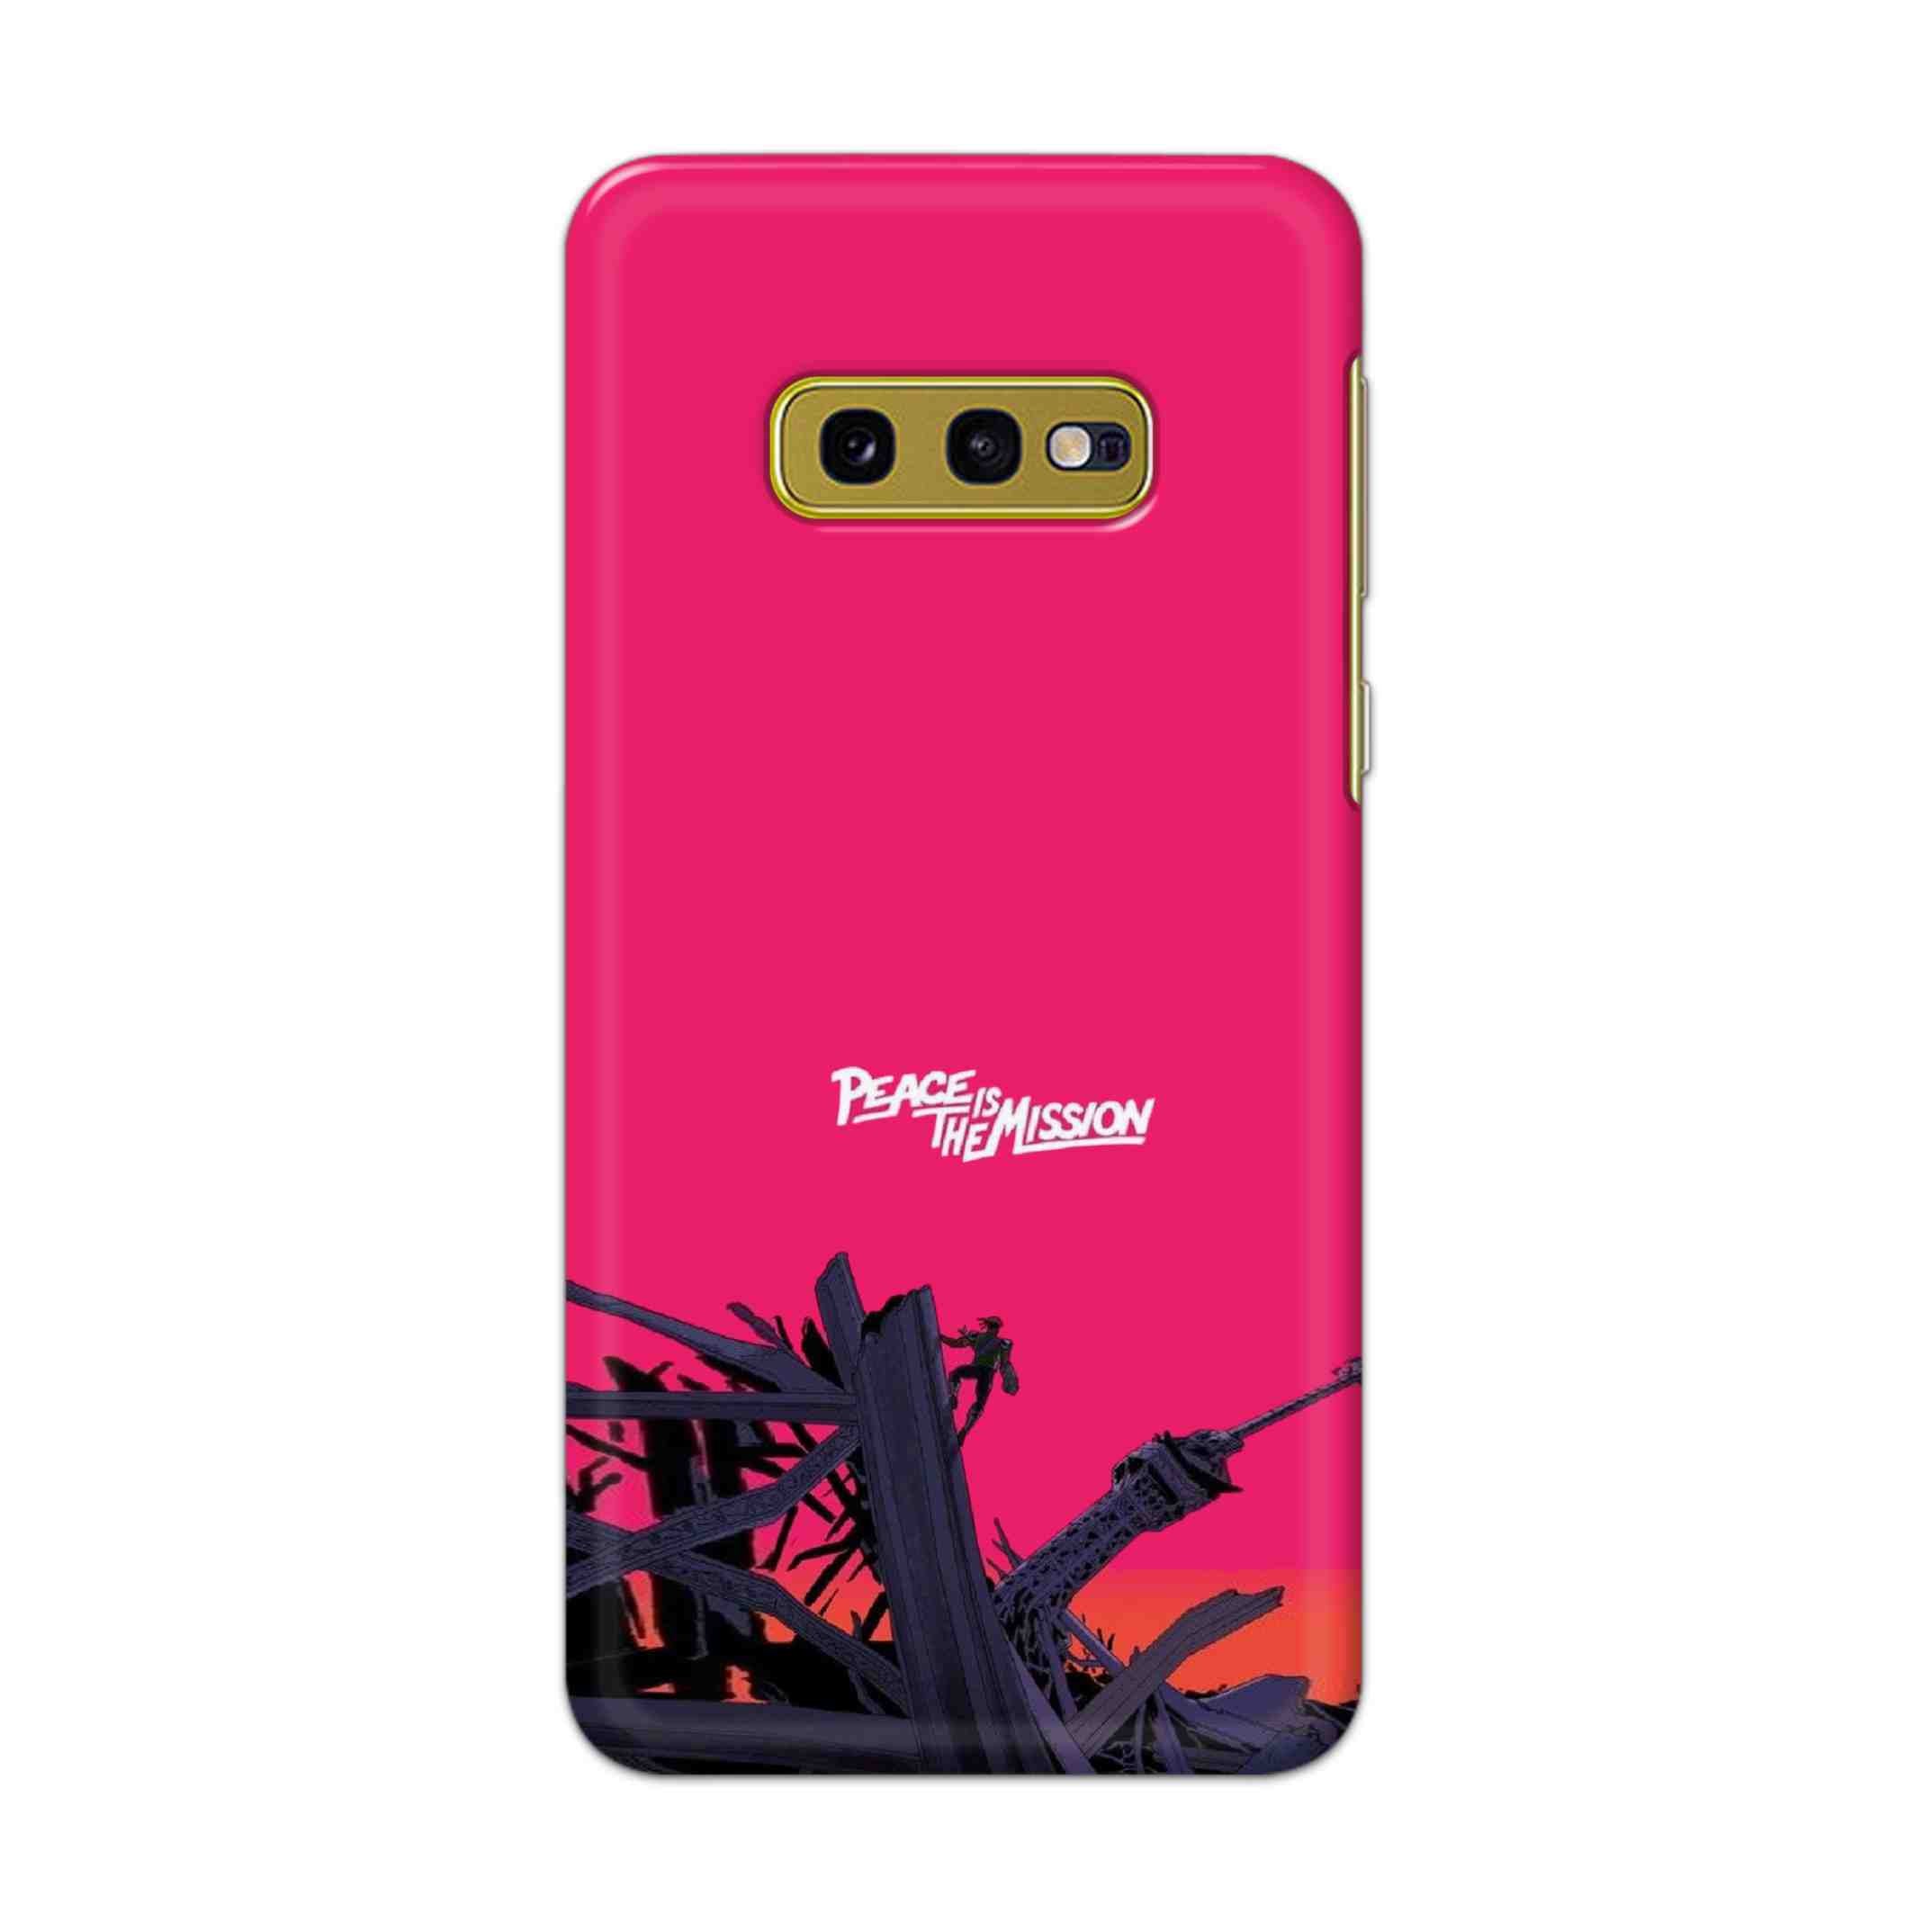 Buy Peace Is The Mission Hard Back Mobile Phone Case Cover For Samsung Galaxy S10e Online